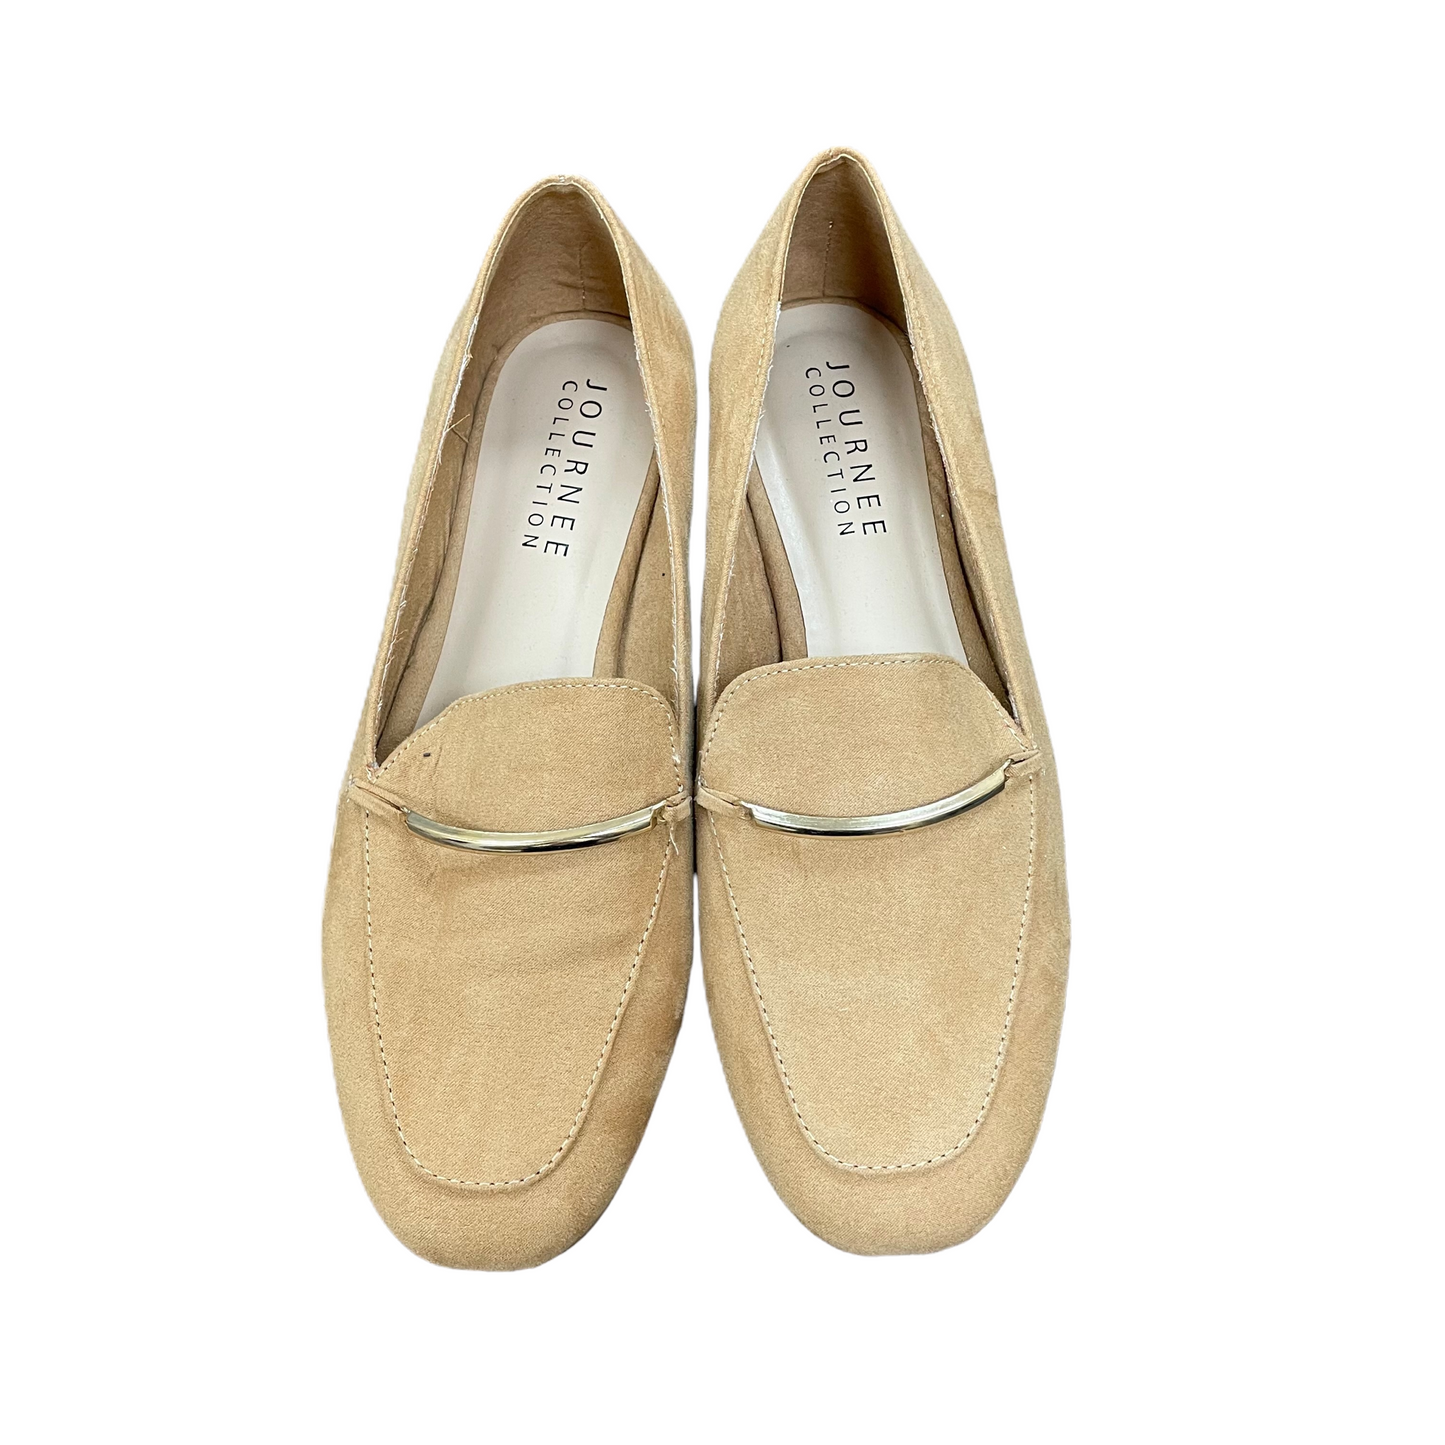 Tan Shoes Flats By Journey, Size: 10